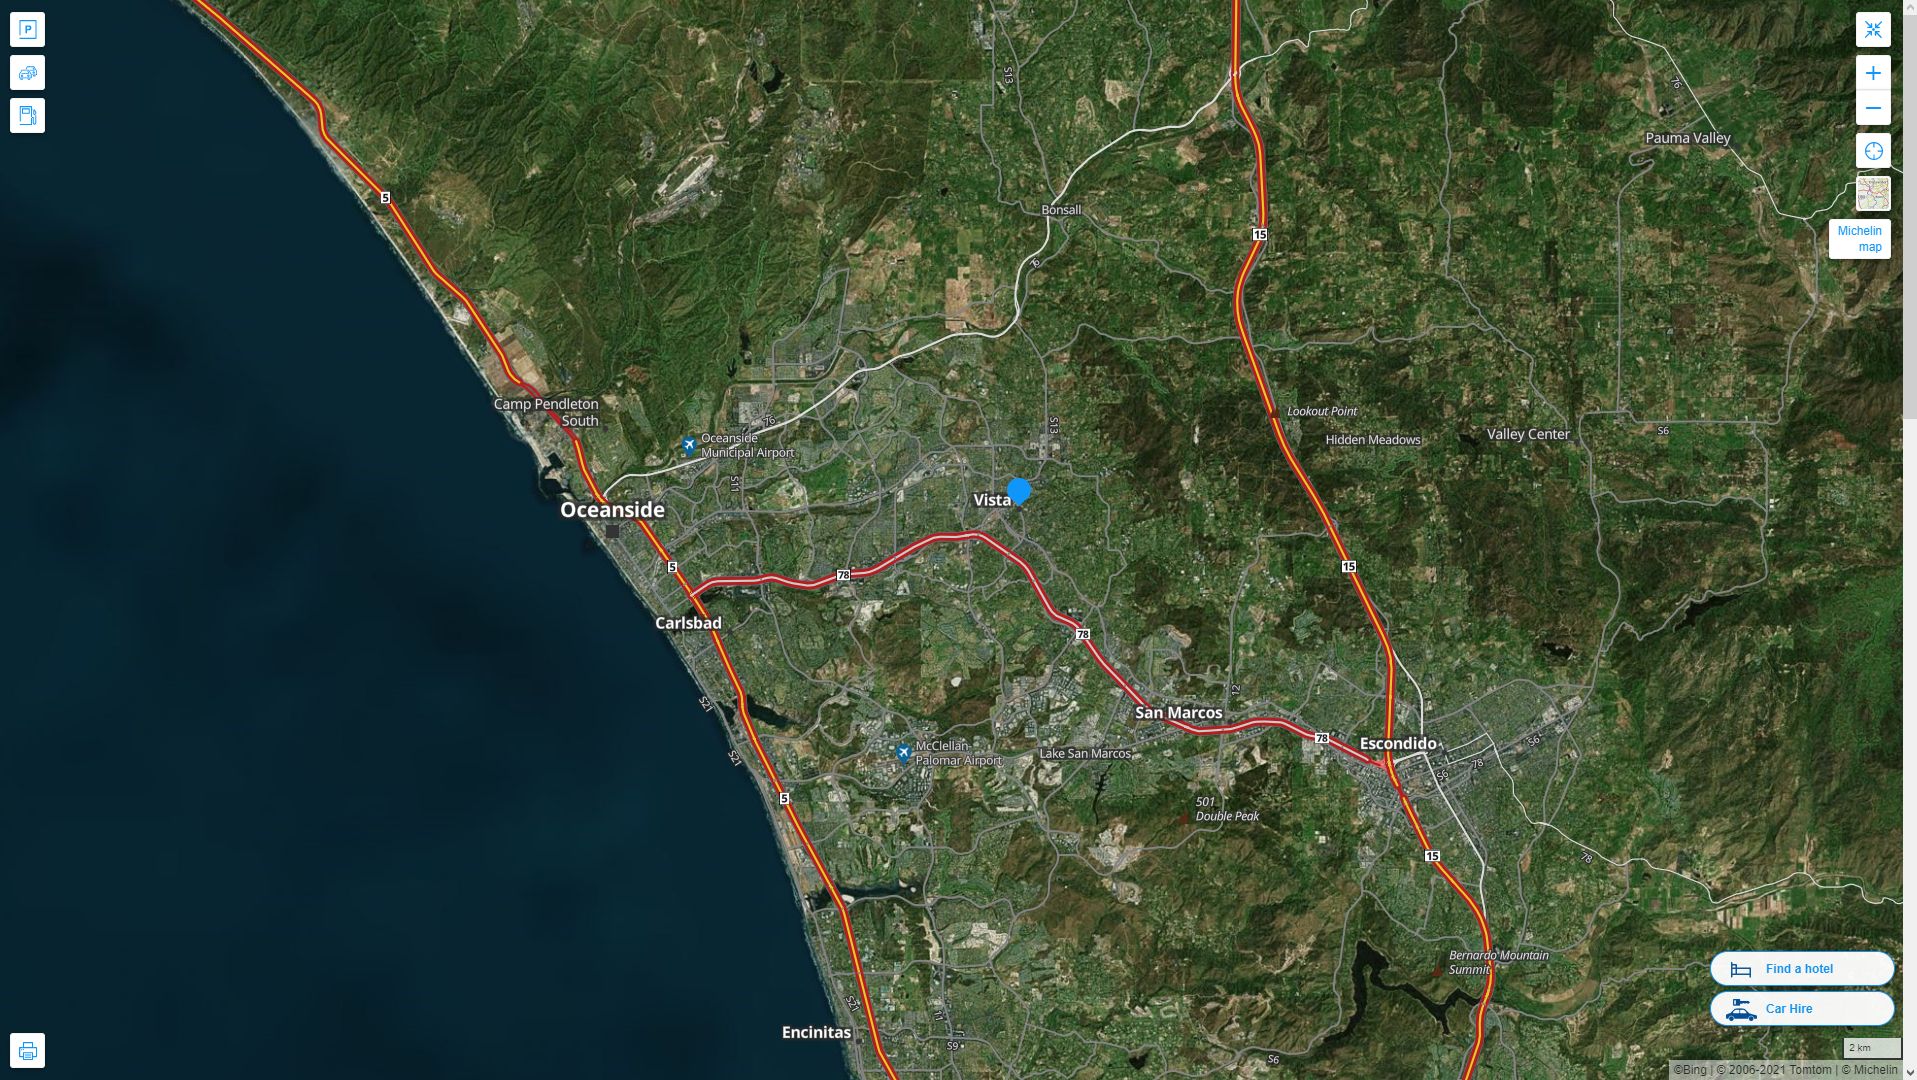 Vista California Highway and Road Map with Satellite View